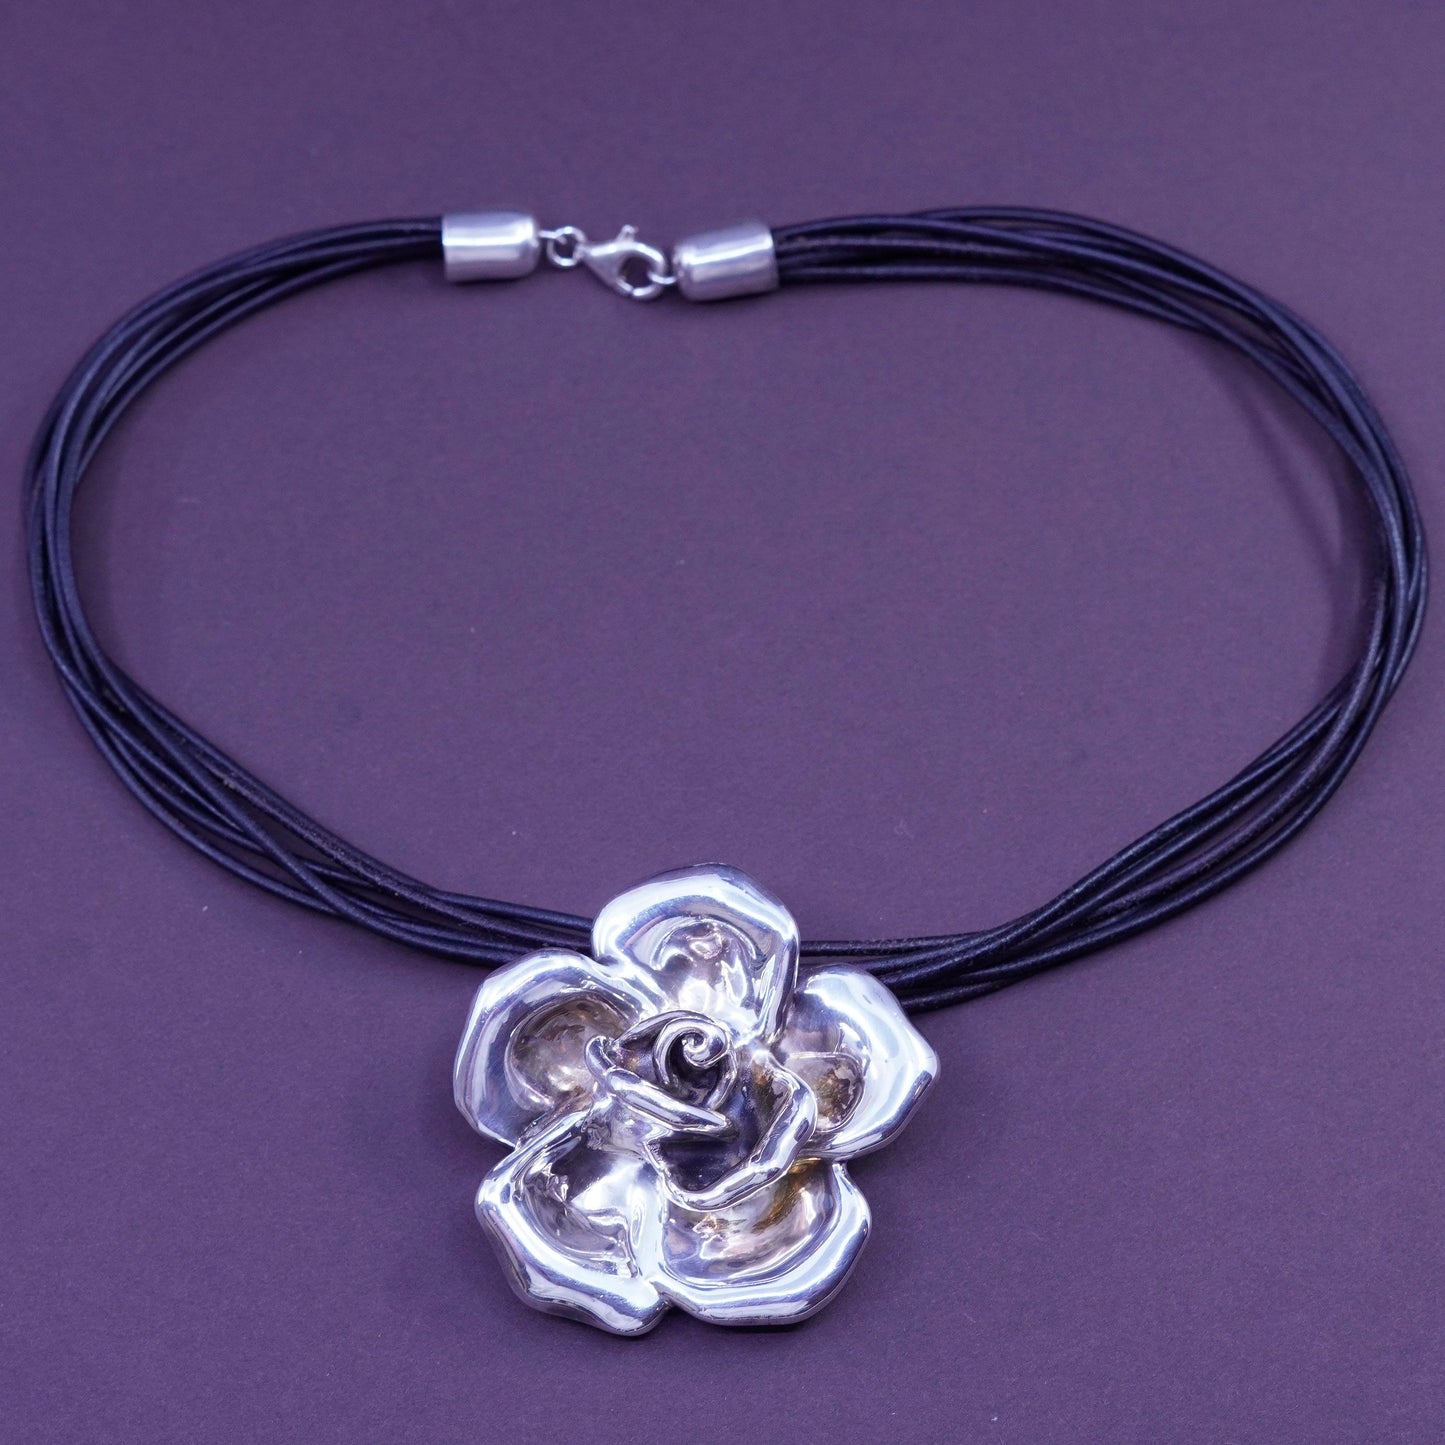 16”, handmade leather necklace with sterling 925 silver flower pendant